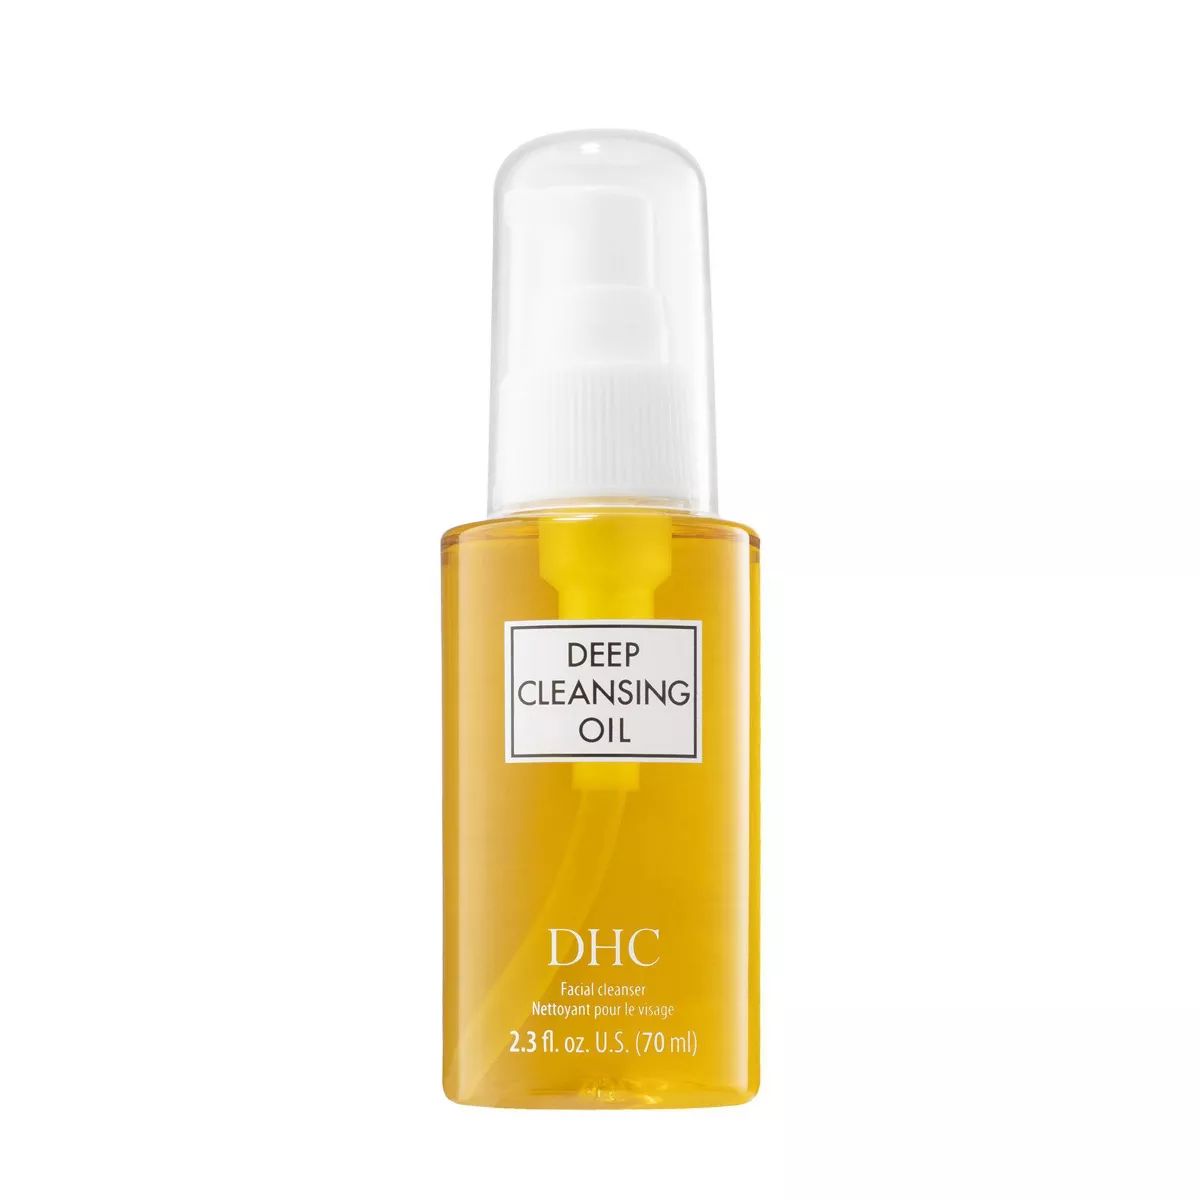 DHC Deep Cleansing Oil Facial Cleanser - Unscented | Target